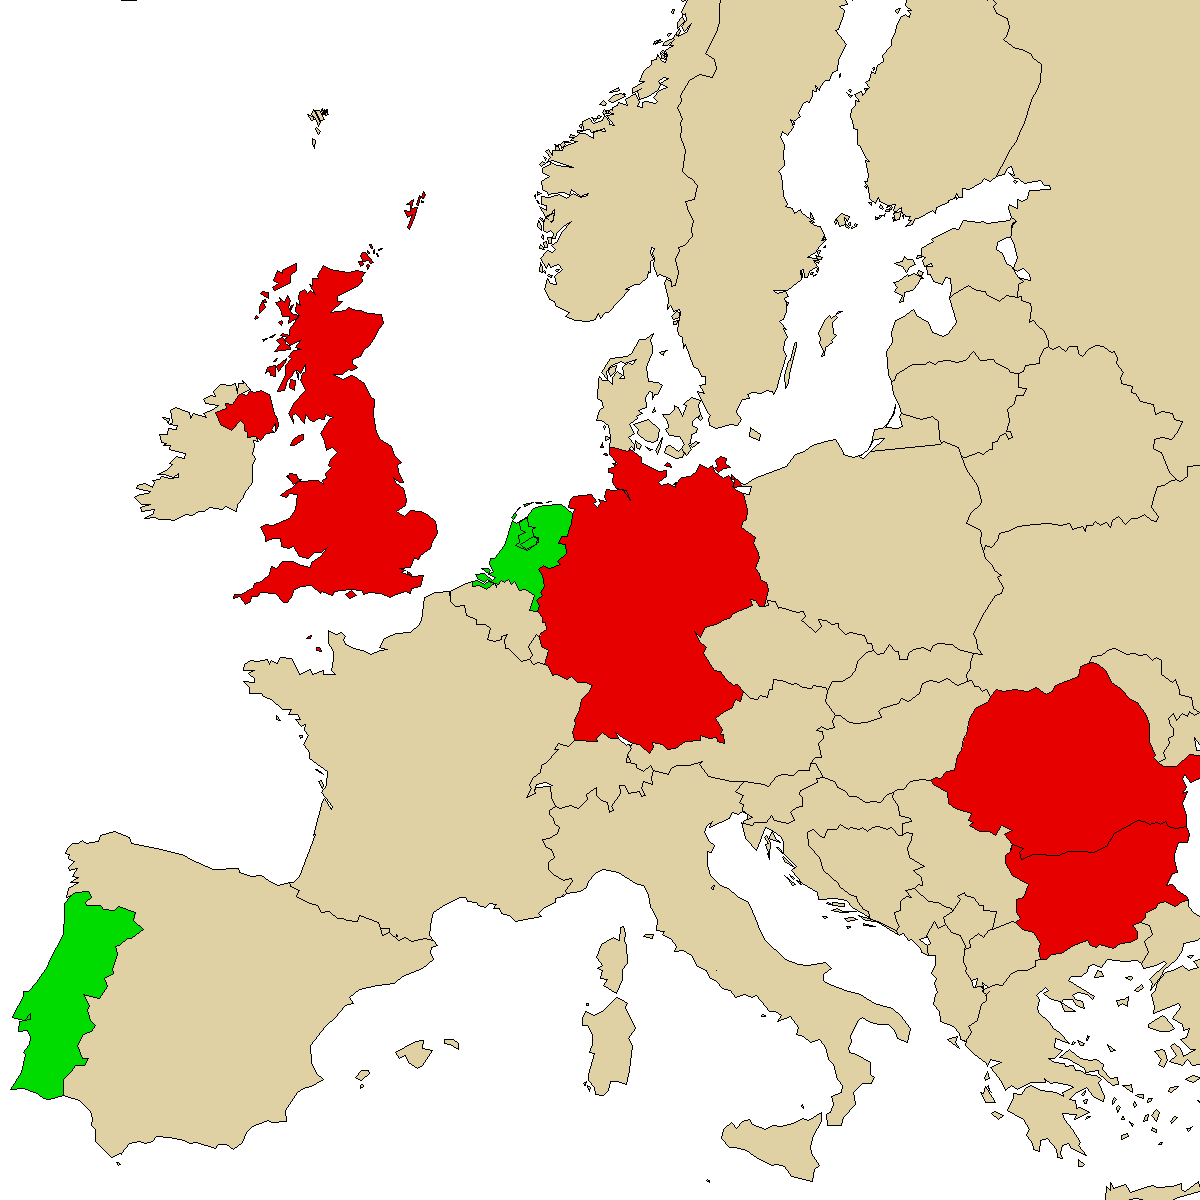 legal info map for our product 6APB, green are countries with no ban, red with ban, grey is unknown